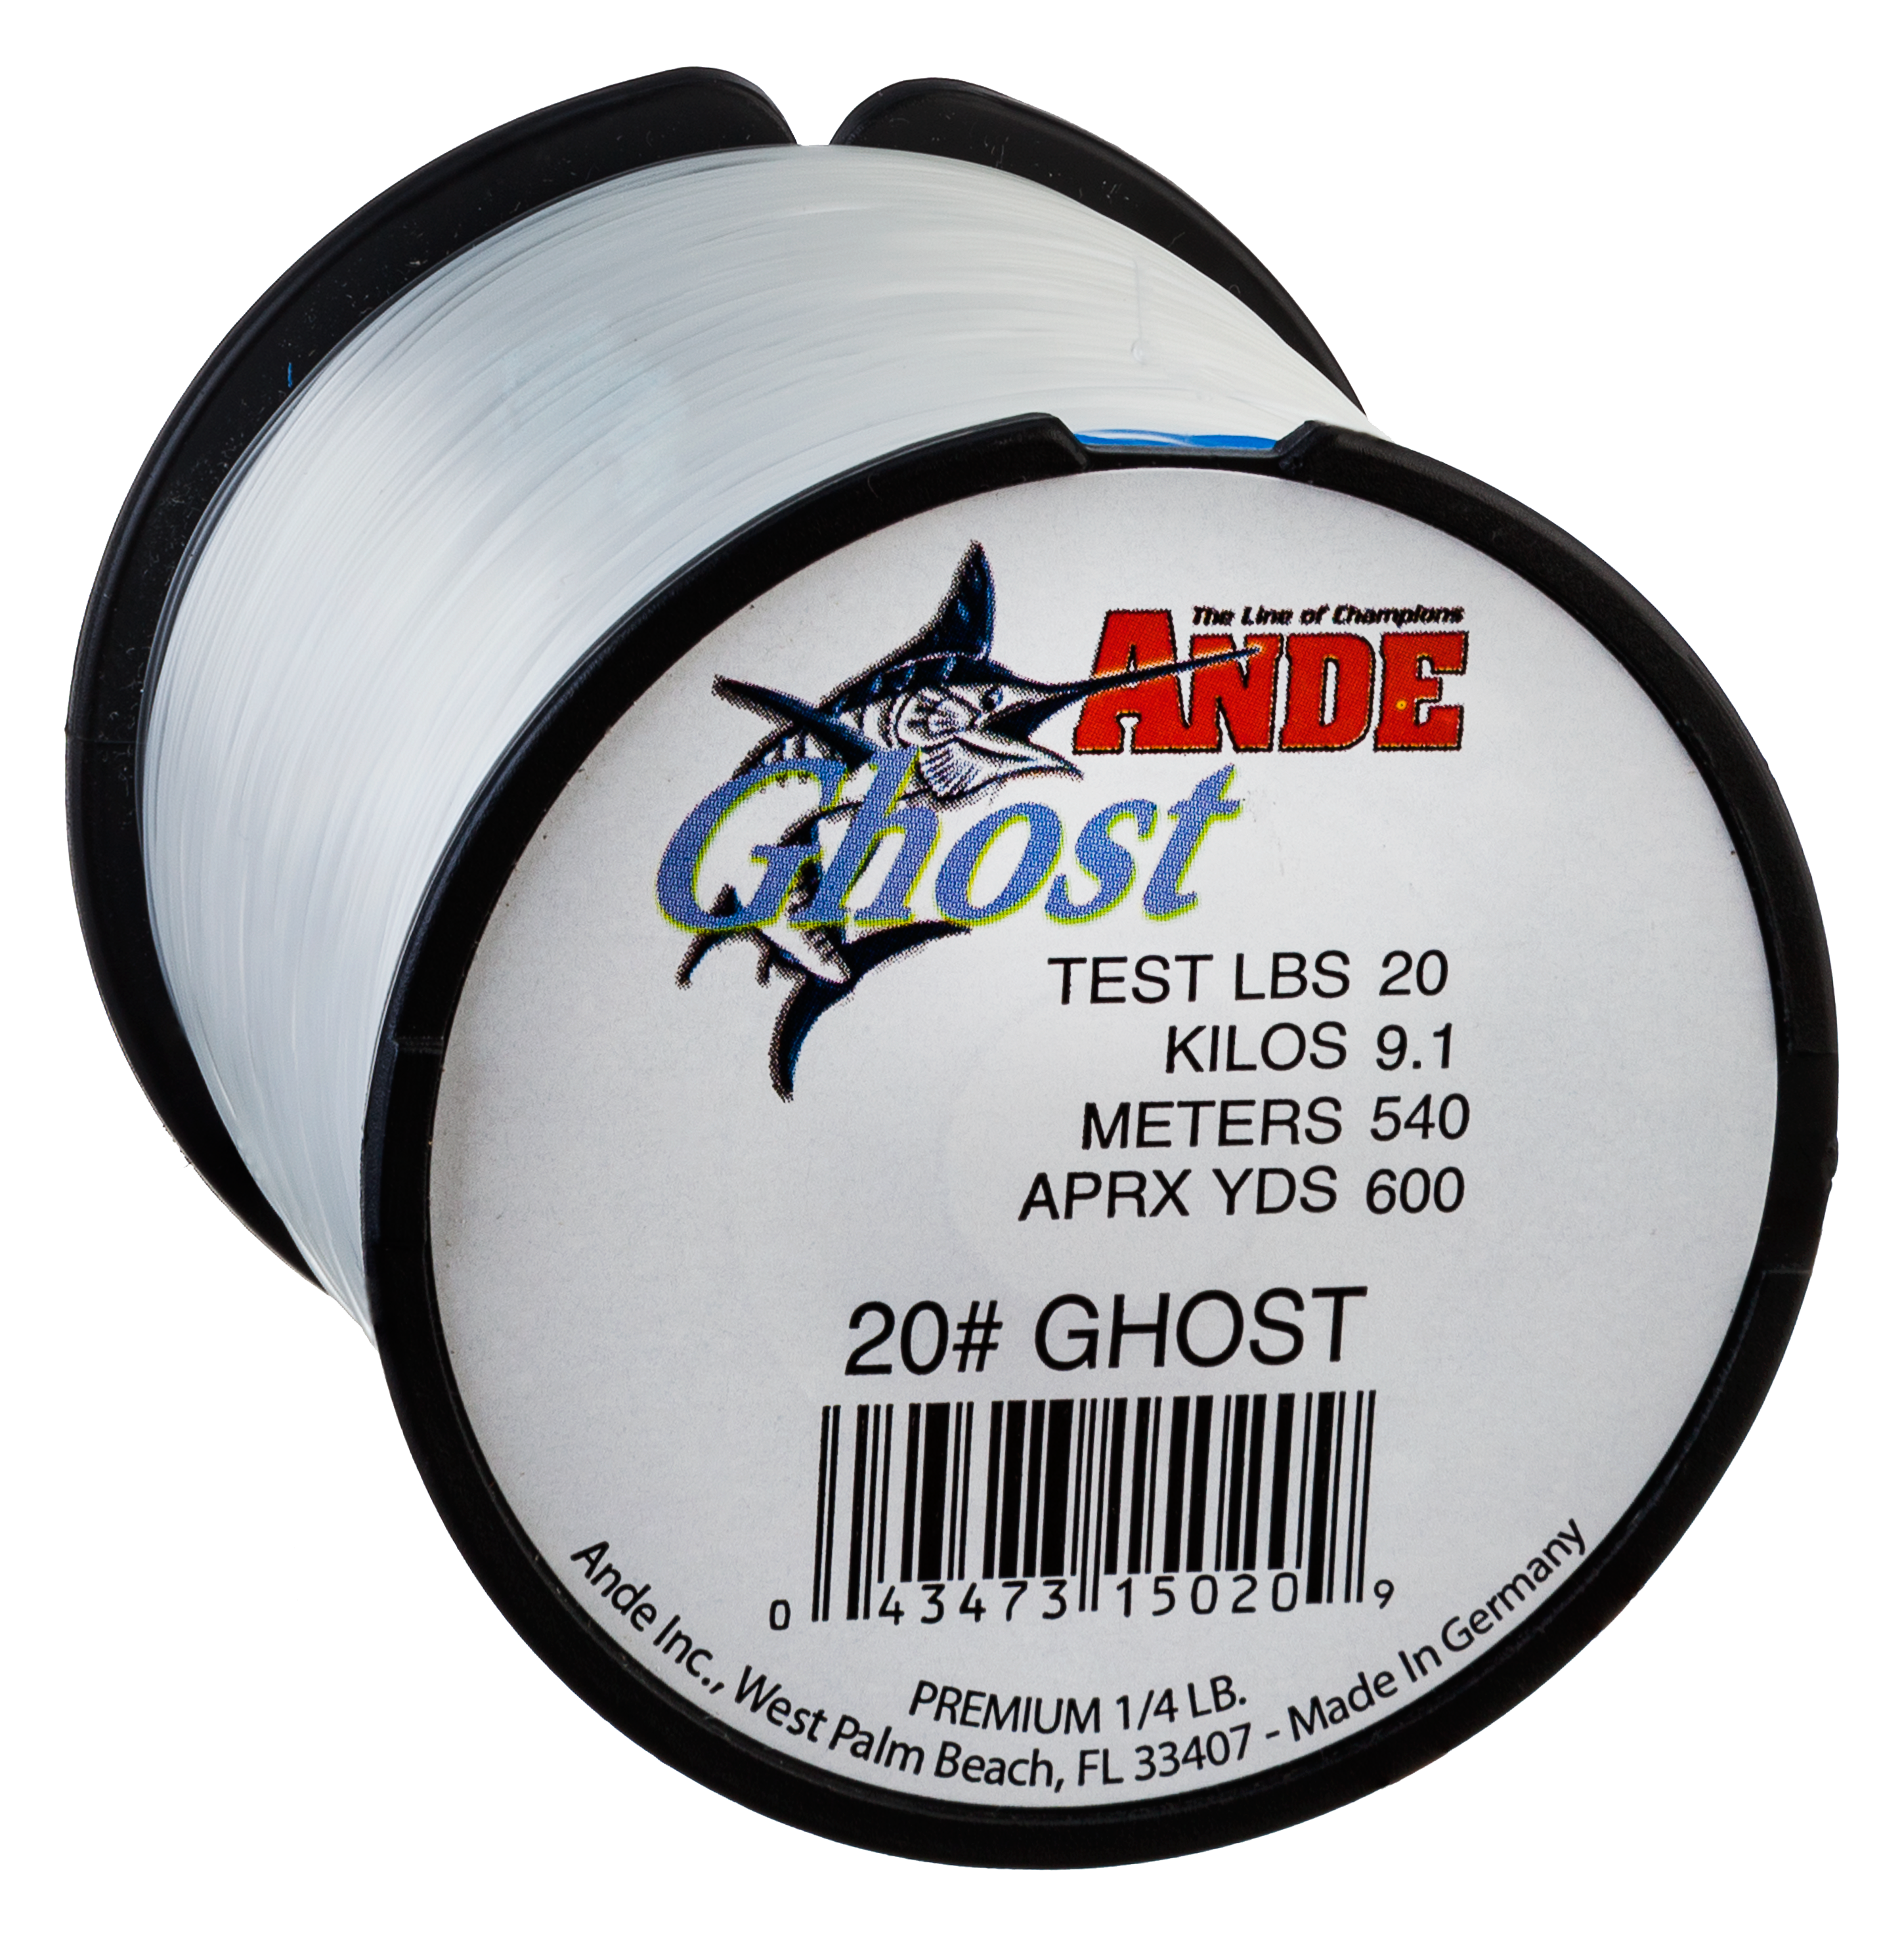 Ande Monofilament Line (Clear, 25 -Pounds Test, 1/4# Spool)